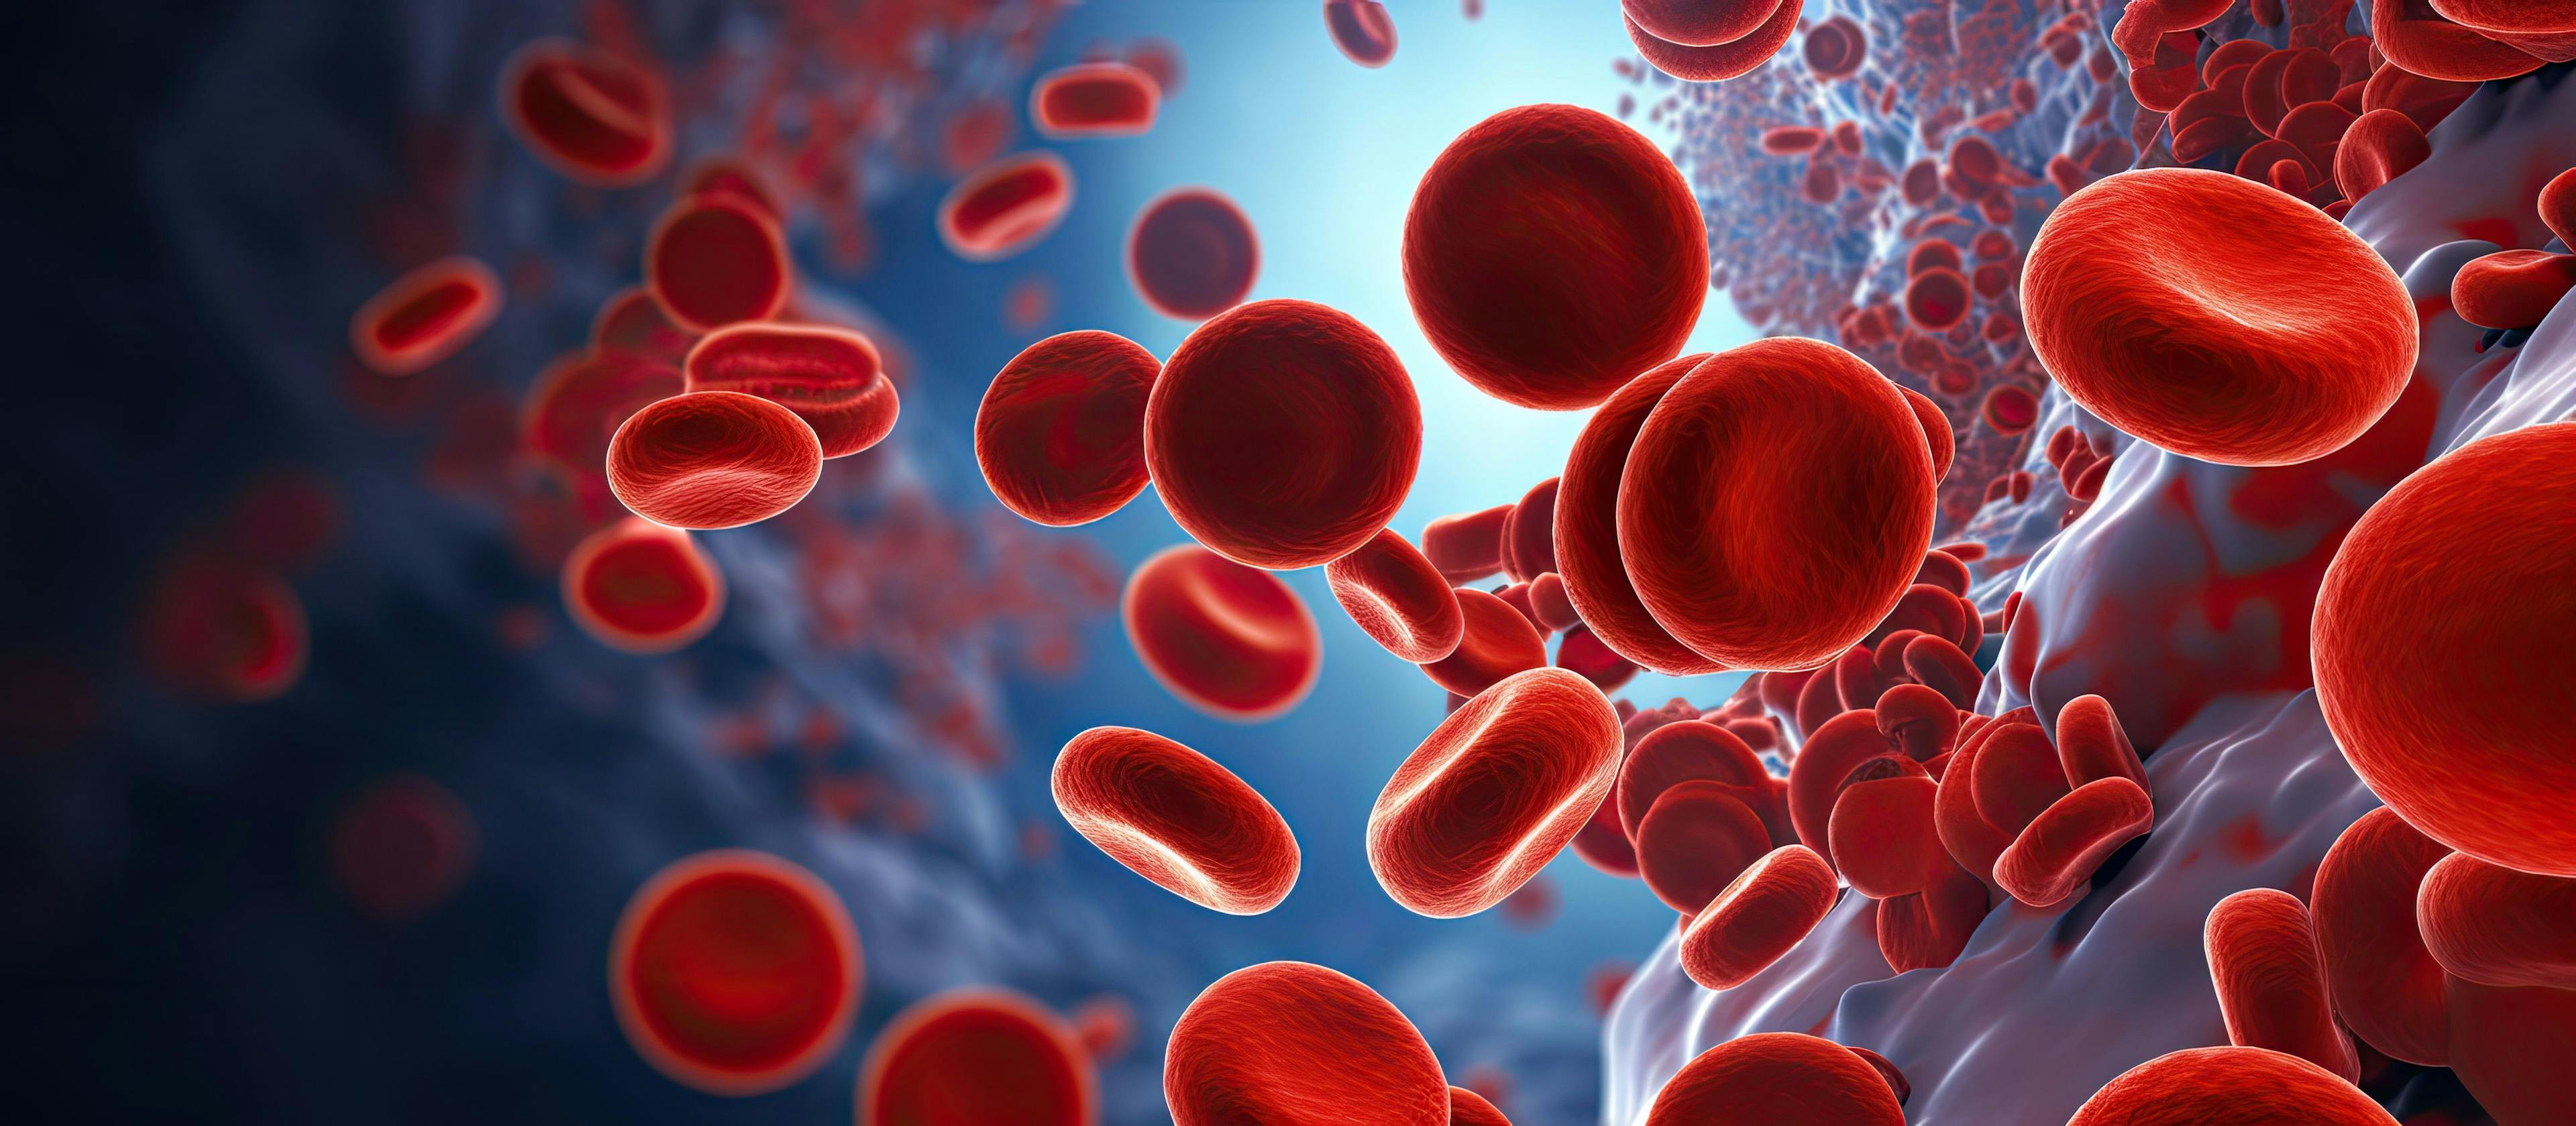 Microscopic images of red blood cells as a result of leukemia: © AkuAku - stock.adobe.com